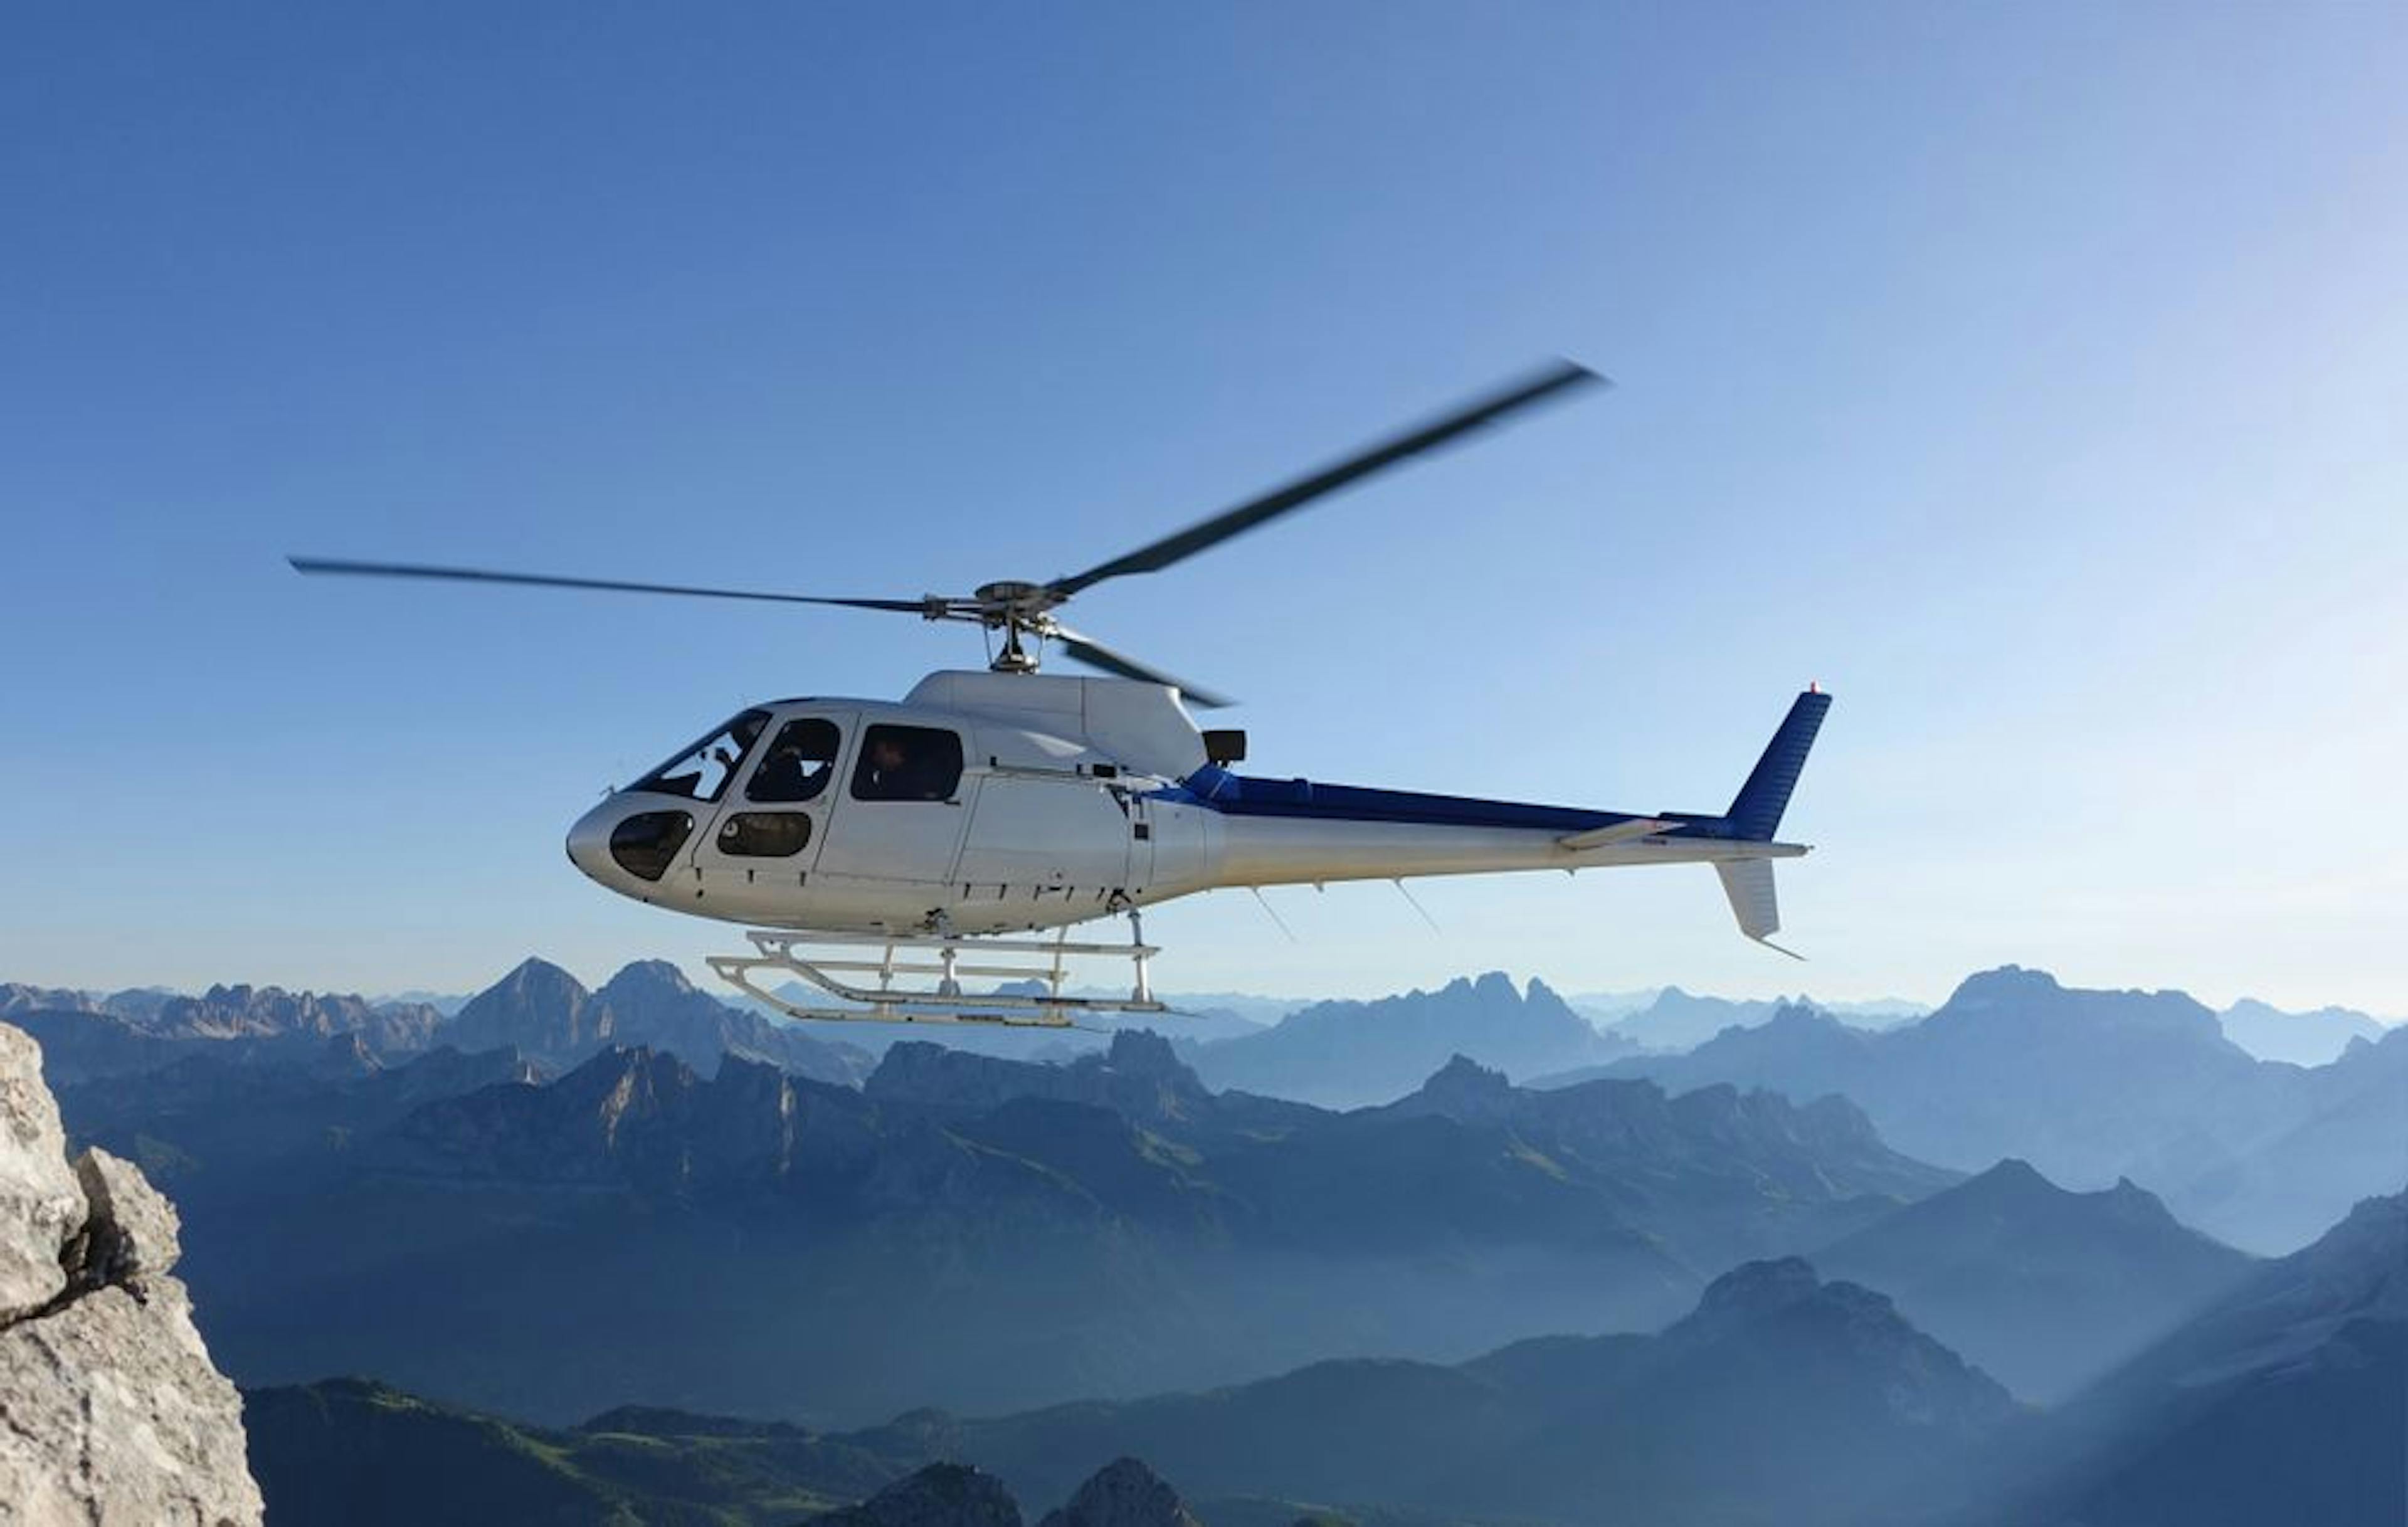 Helicopter tour of the Alps